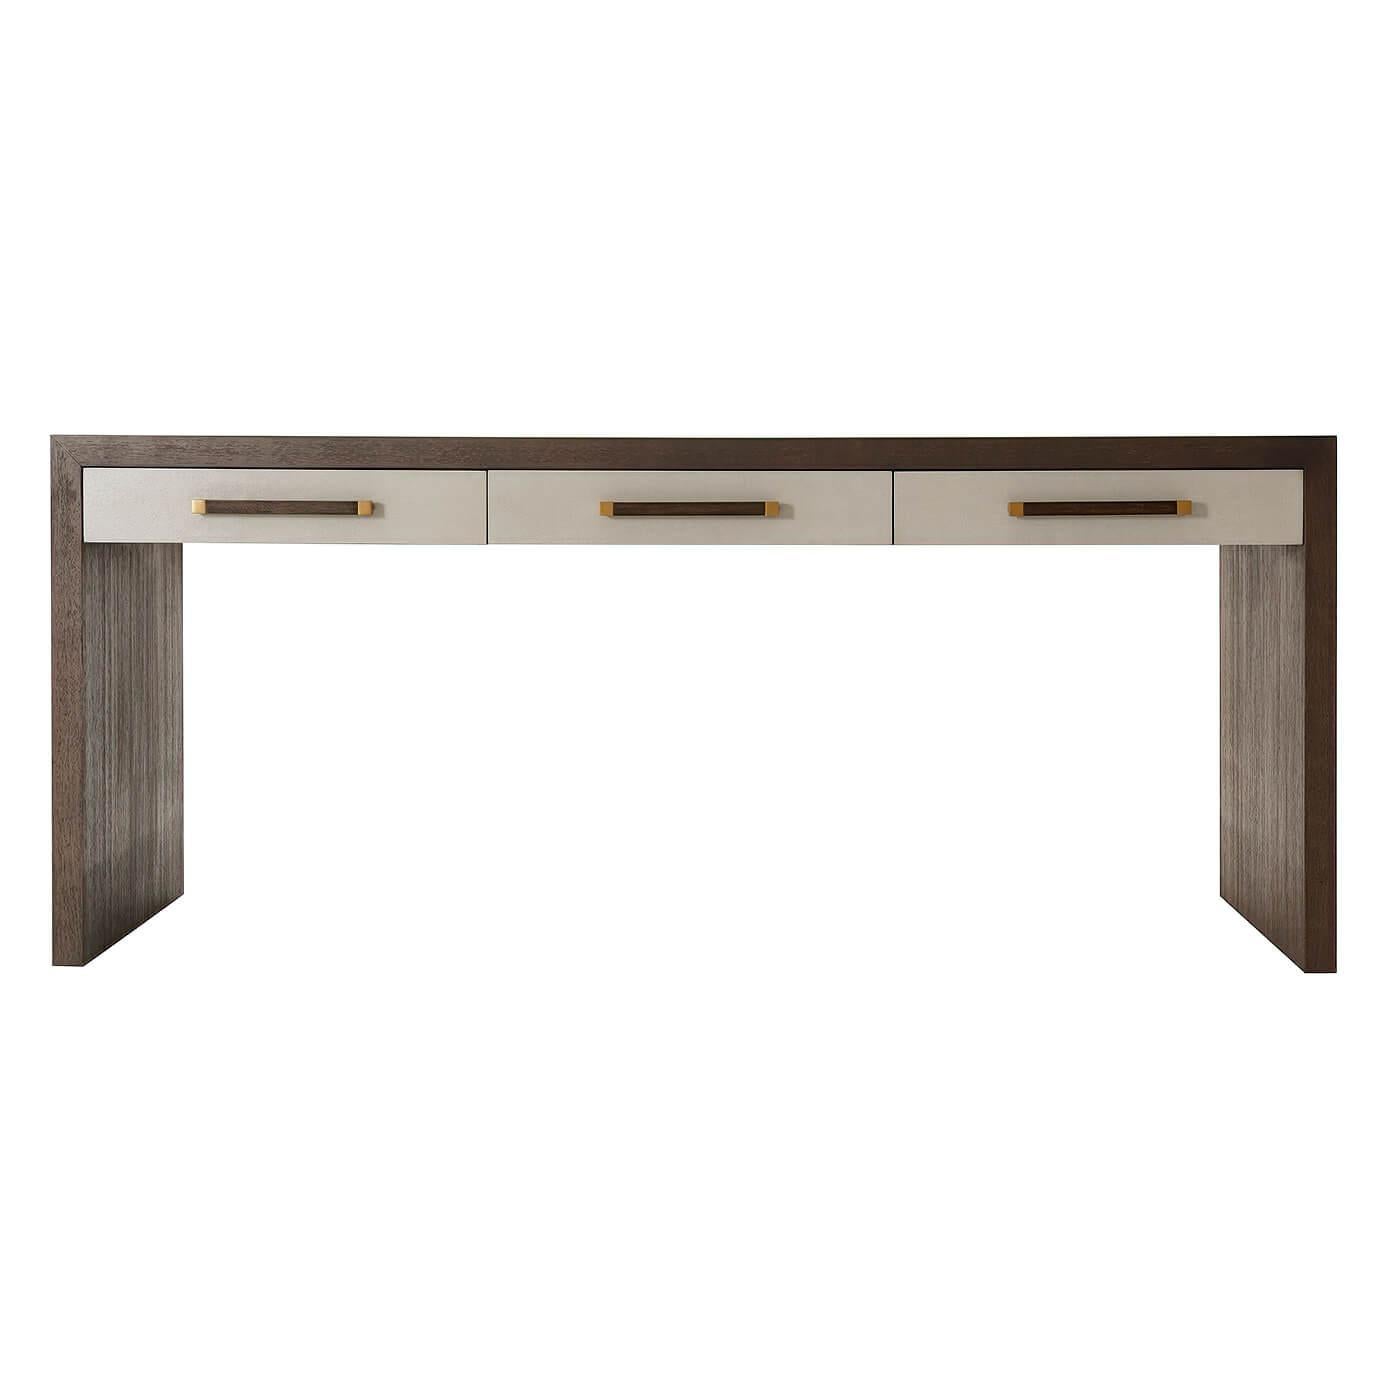 An elegant modern writing table with three singular leather wrapped drawers, our Cardamon finish on the veneered frame (and handles) with panel end supports and brushed brass finish accents.

Dimensions: 72